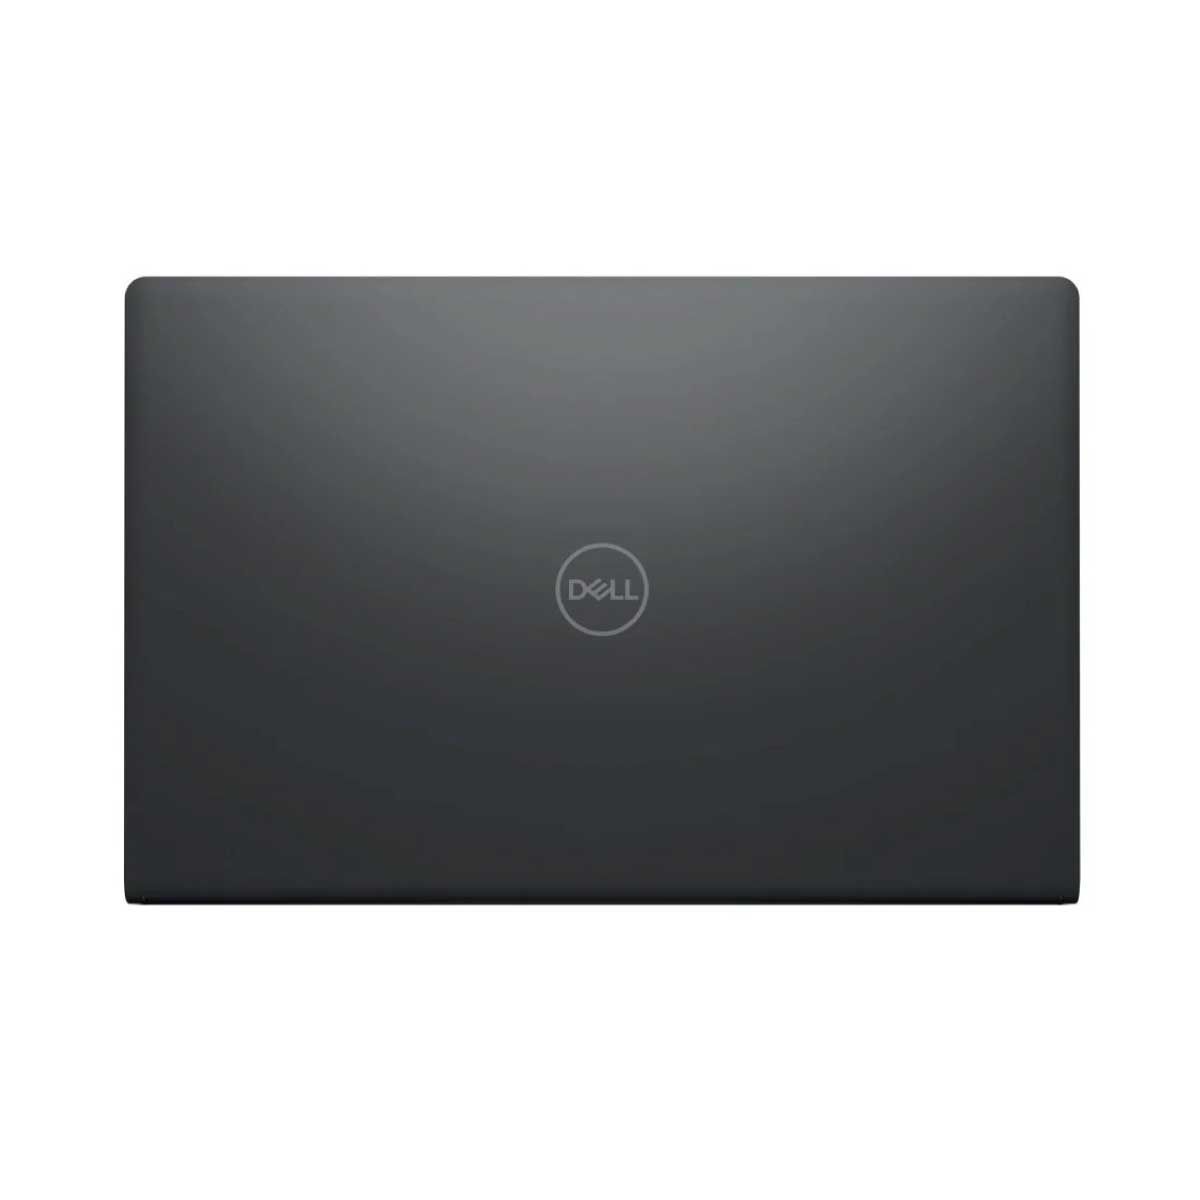 NOTEBOOK (โน้ตบุ๊ค) DELL INSPIRON 3530-IN3530GH7Y2001OGTH (CARBON BLACK)